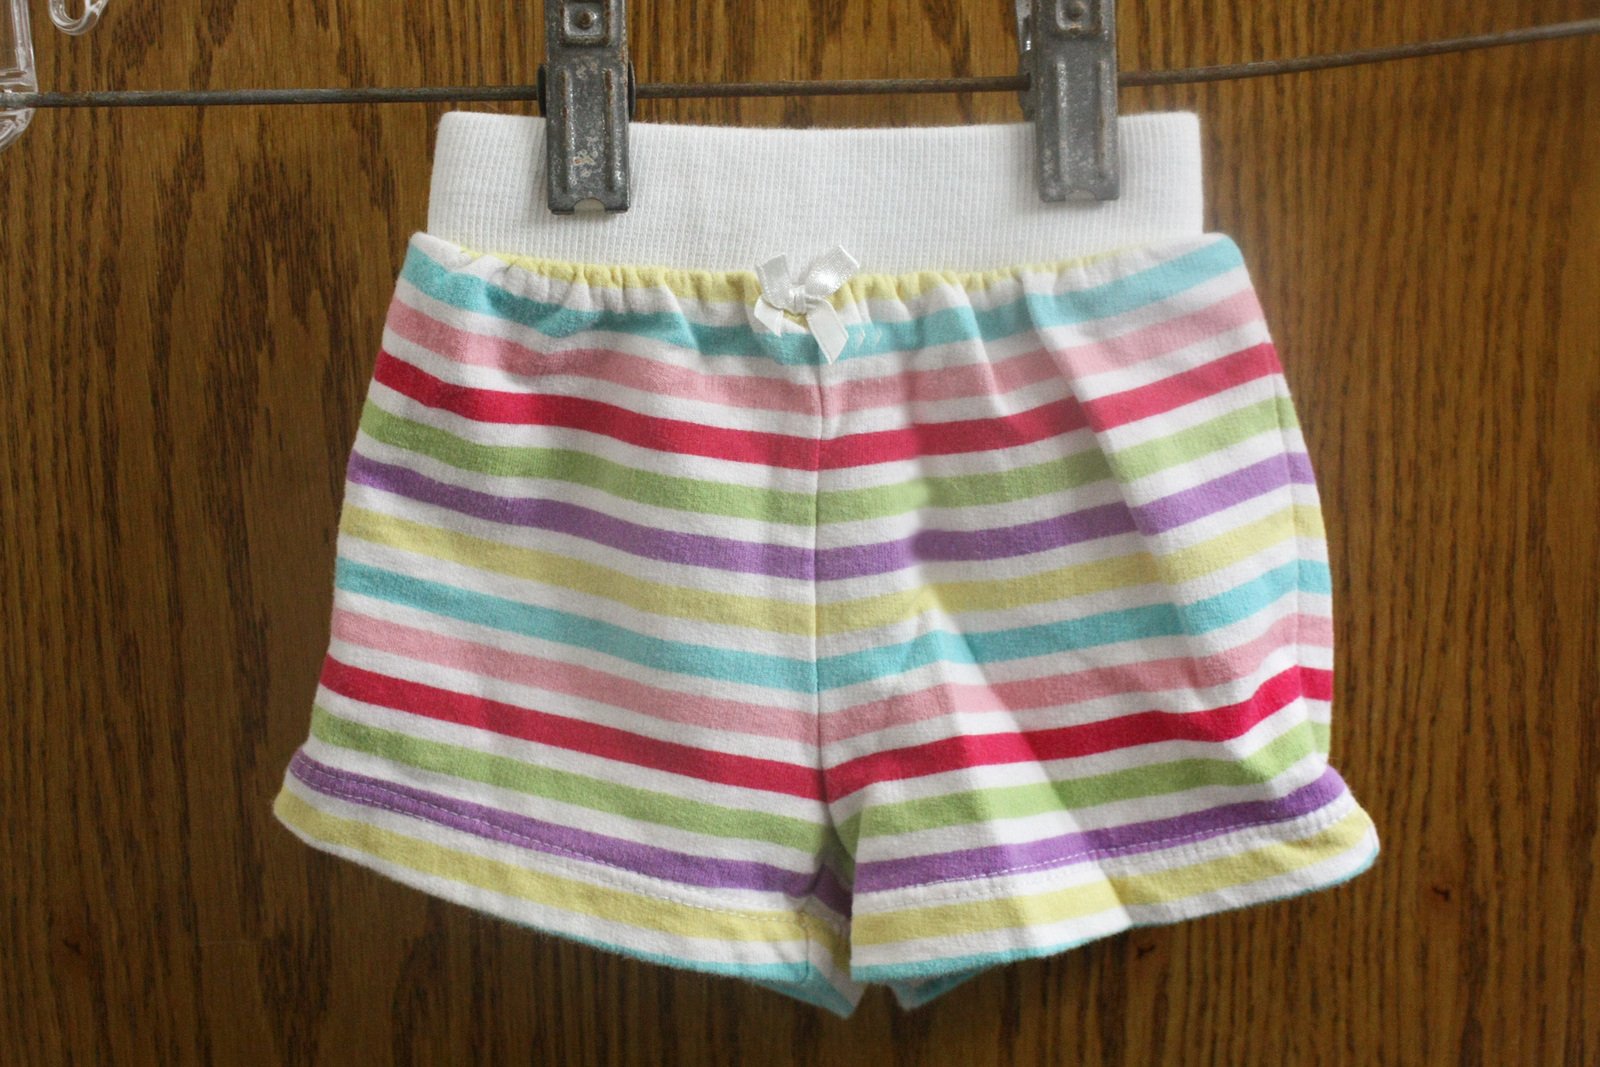 Circo White Shorts with Rainbow Stripes - Size Girls 3 Months  - $7.99